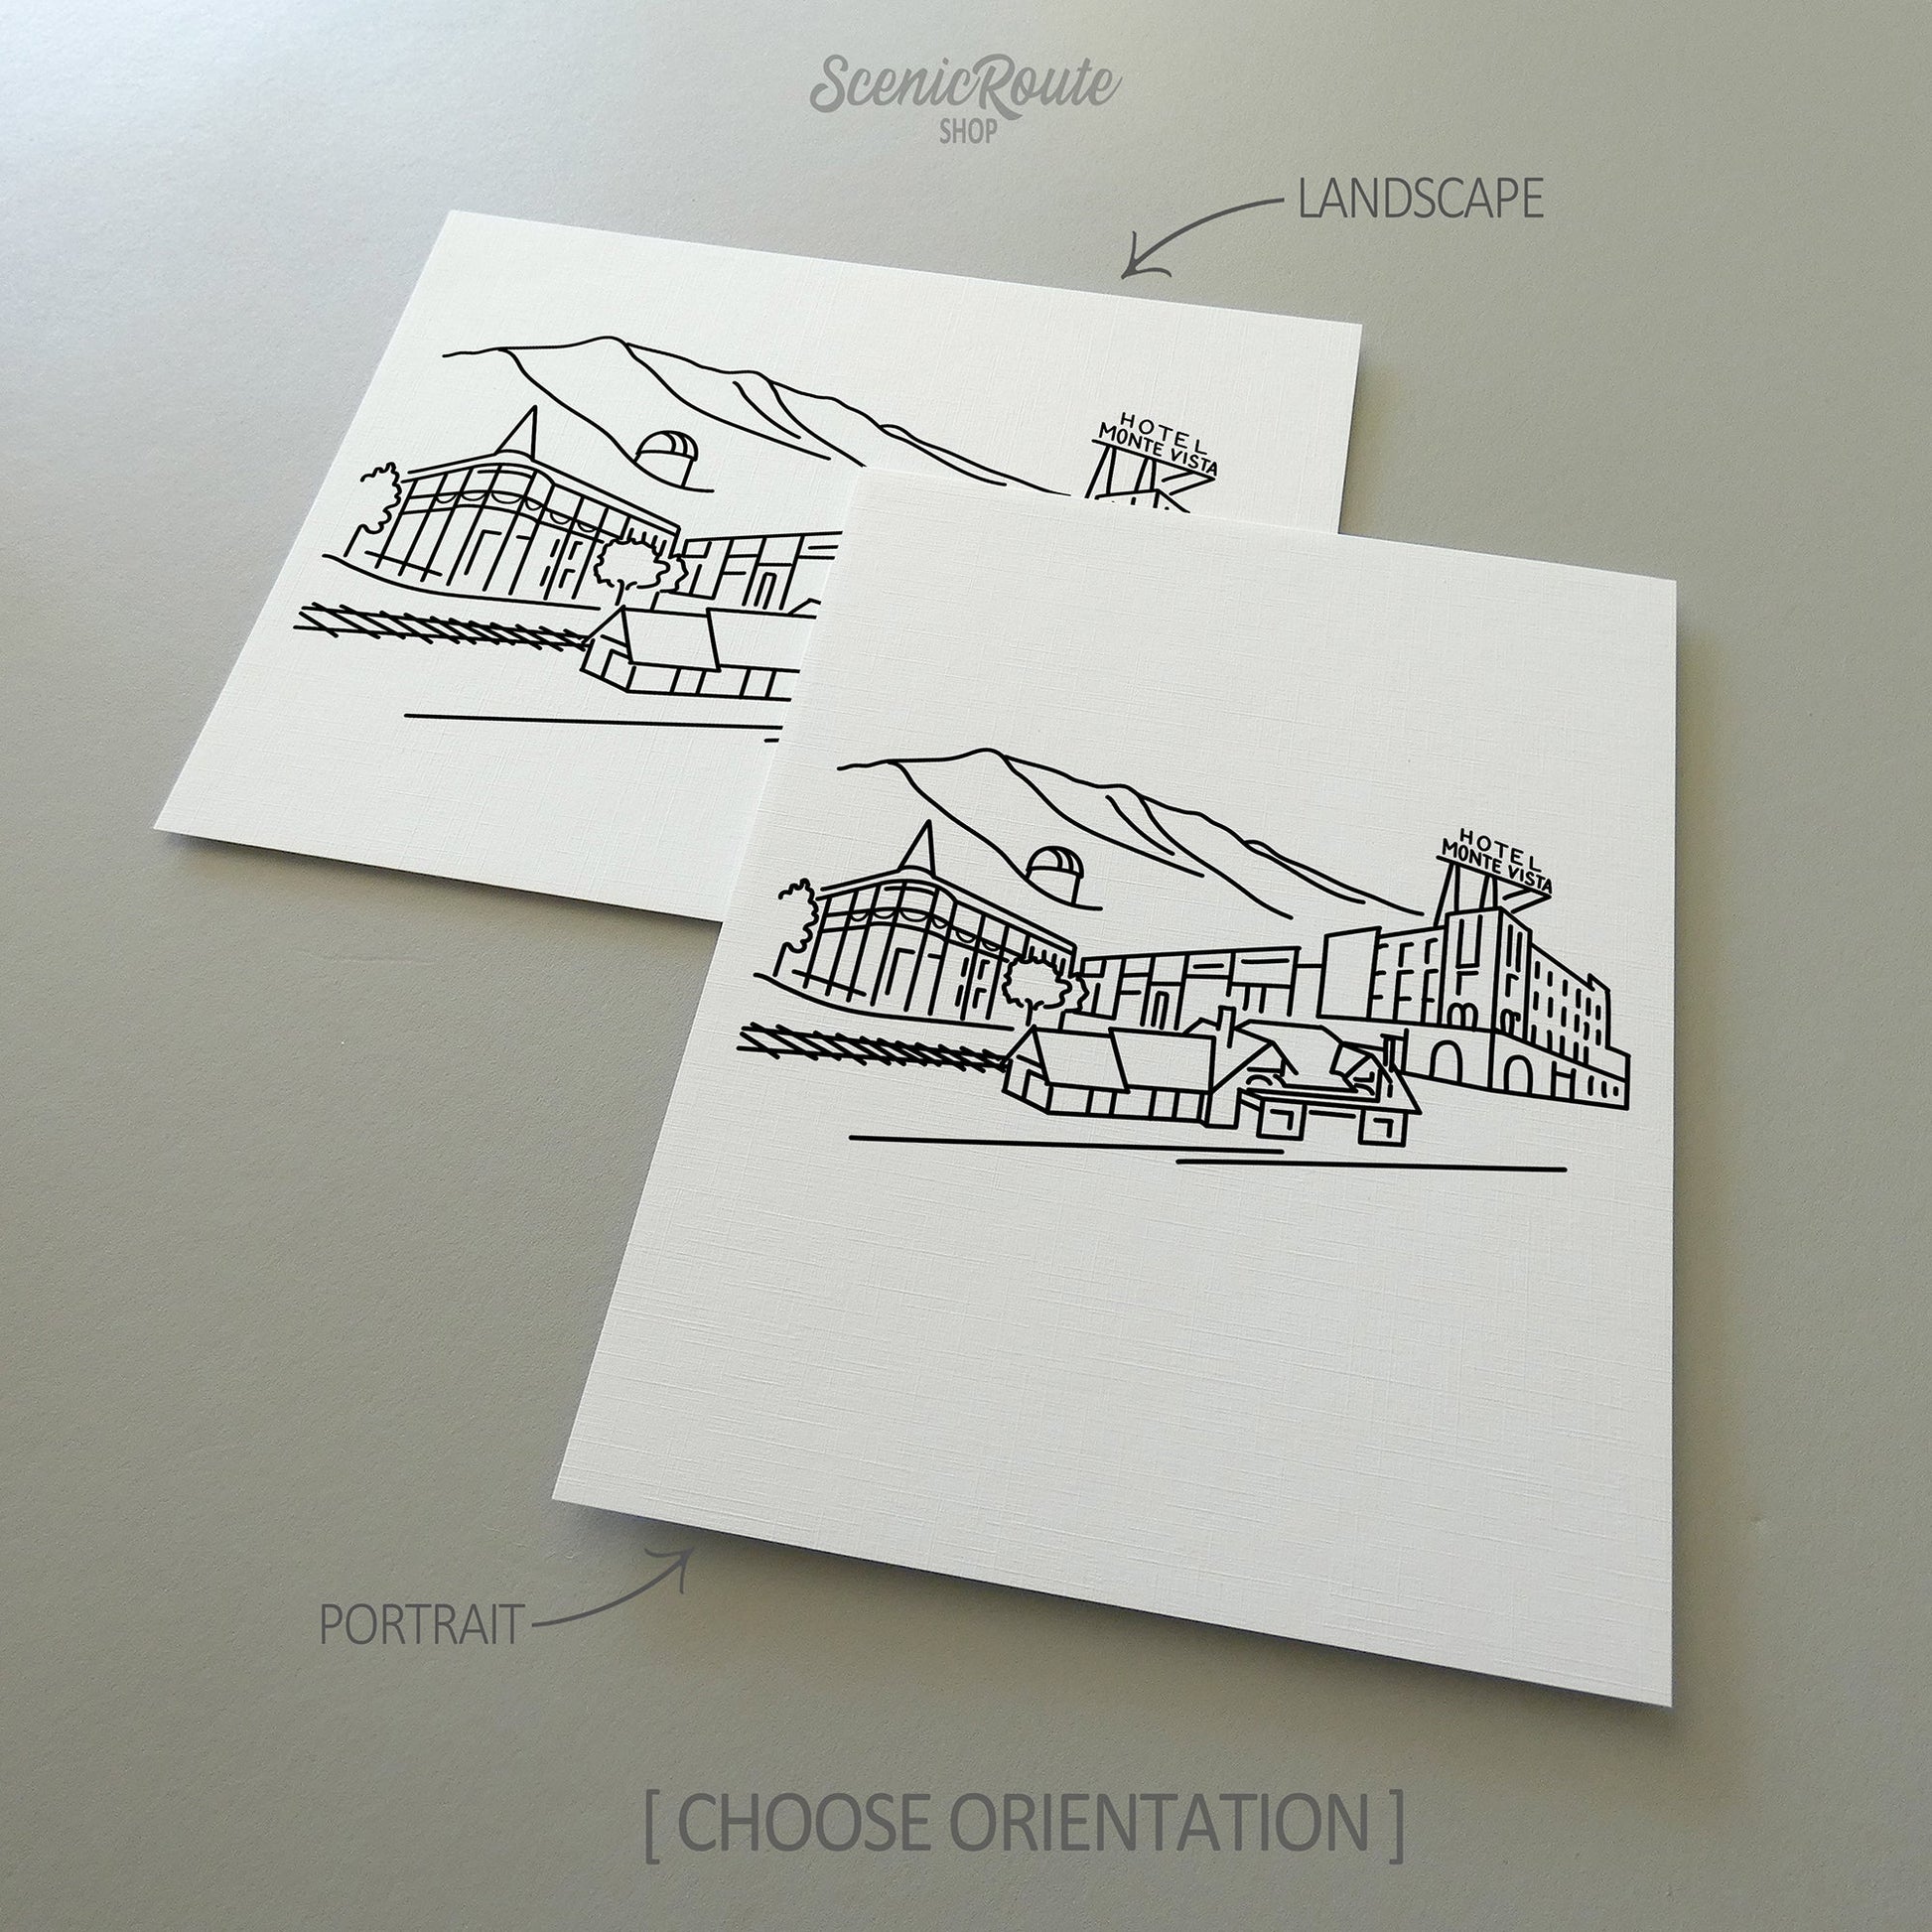 Two line art drawings of the Flagstaff Skyline on white linen paper with a gray background.  The pieces are shown in portrait and landscape orientation for the available art print options.